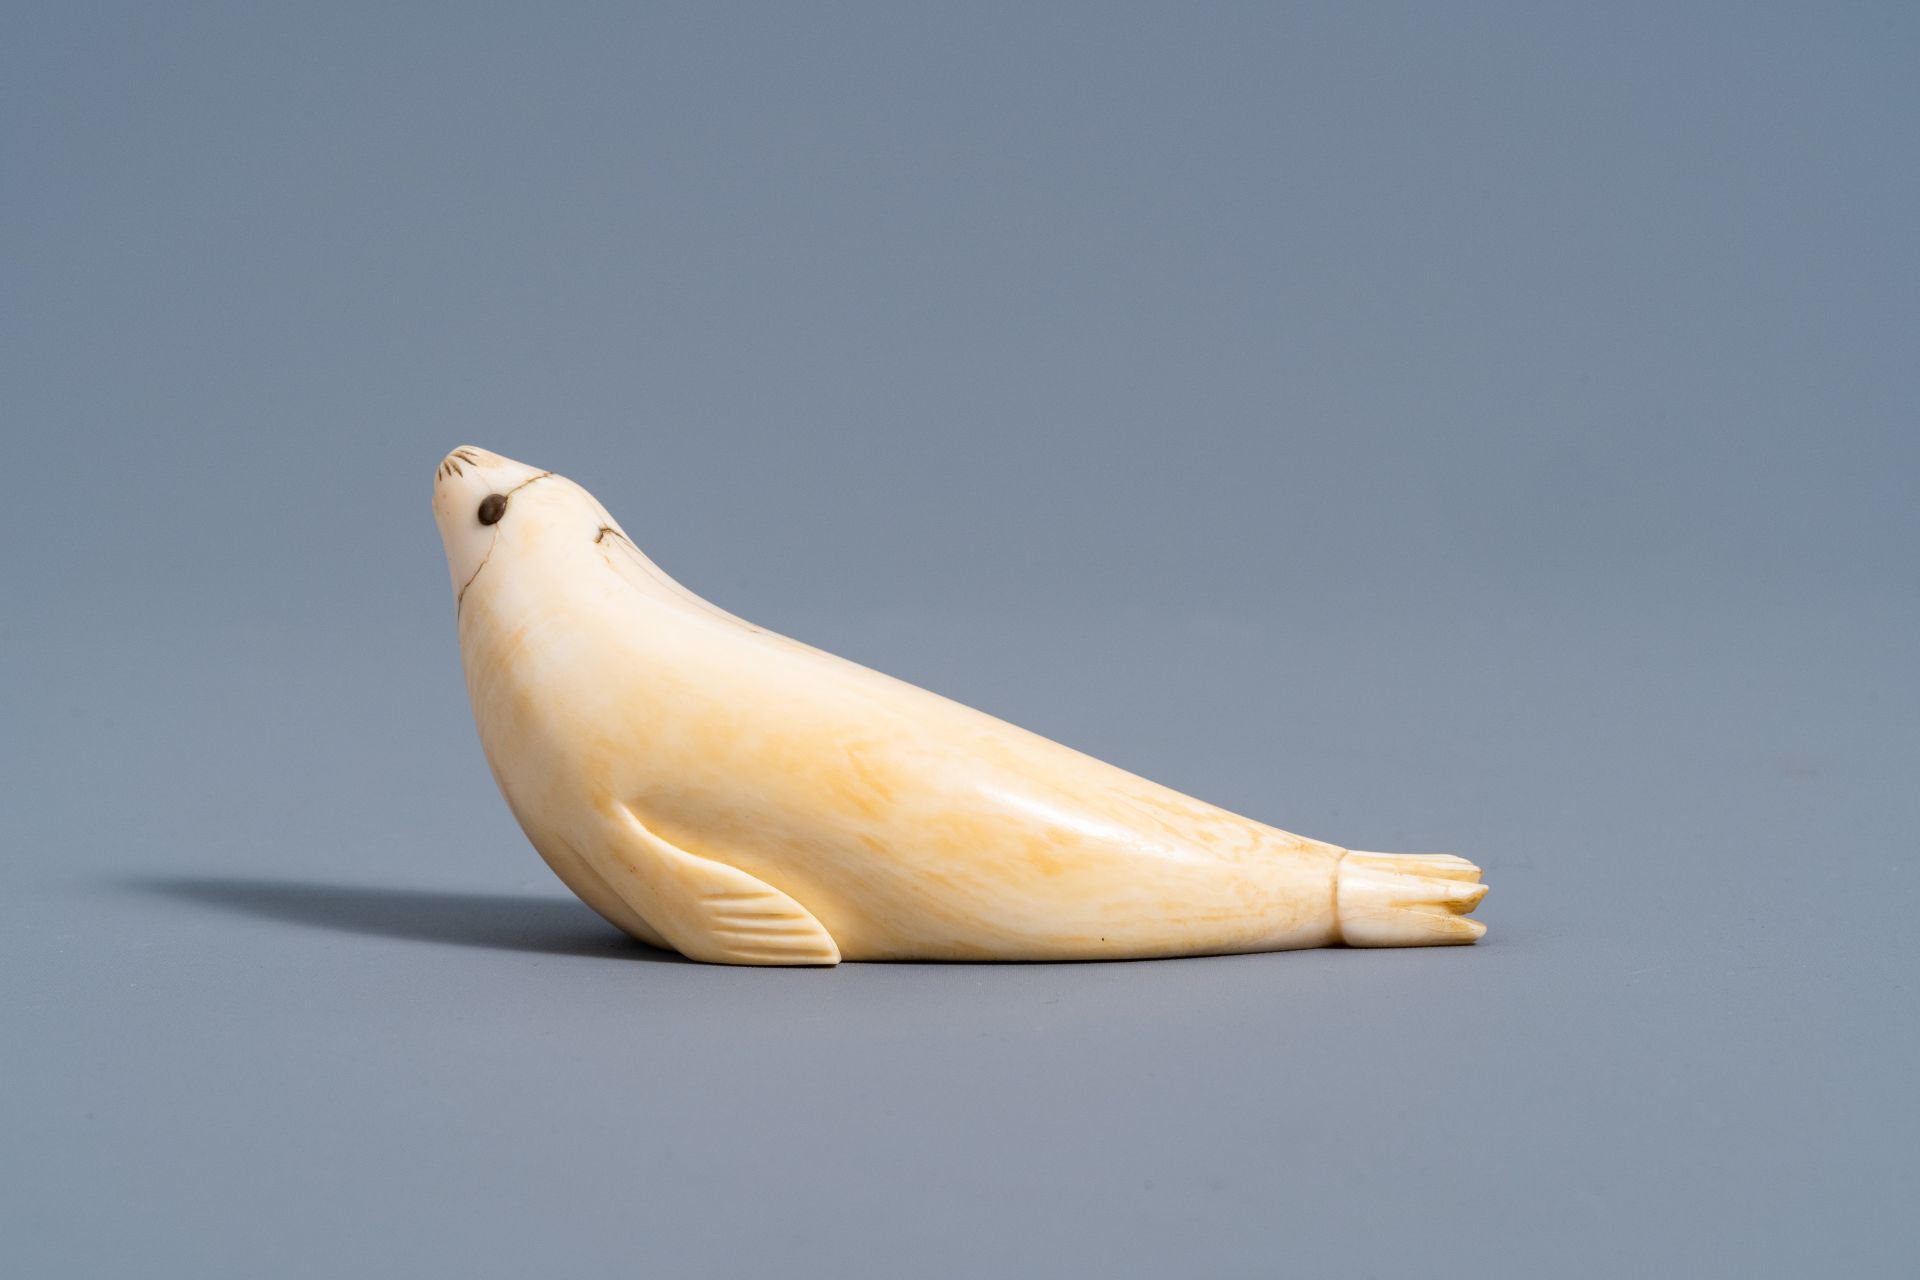 An Inuit carved whale ivory figure of a seal, Canada or Alaska, 19th C. - Image 5 of 11